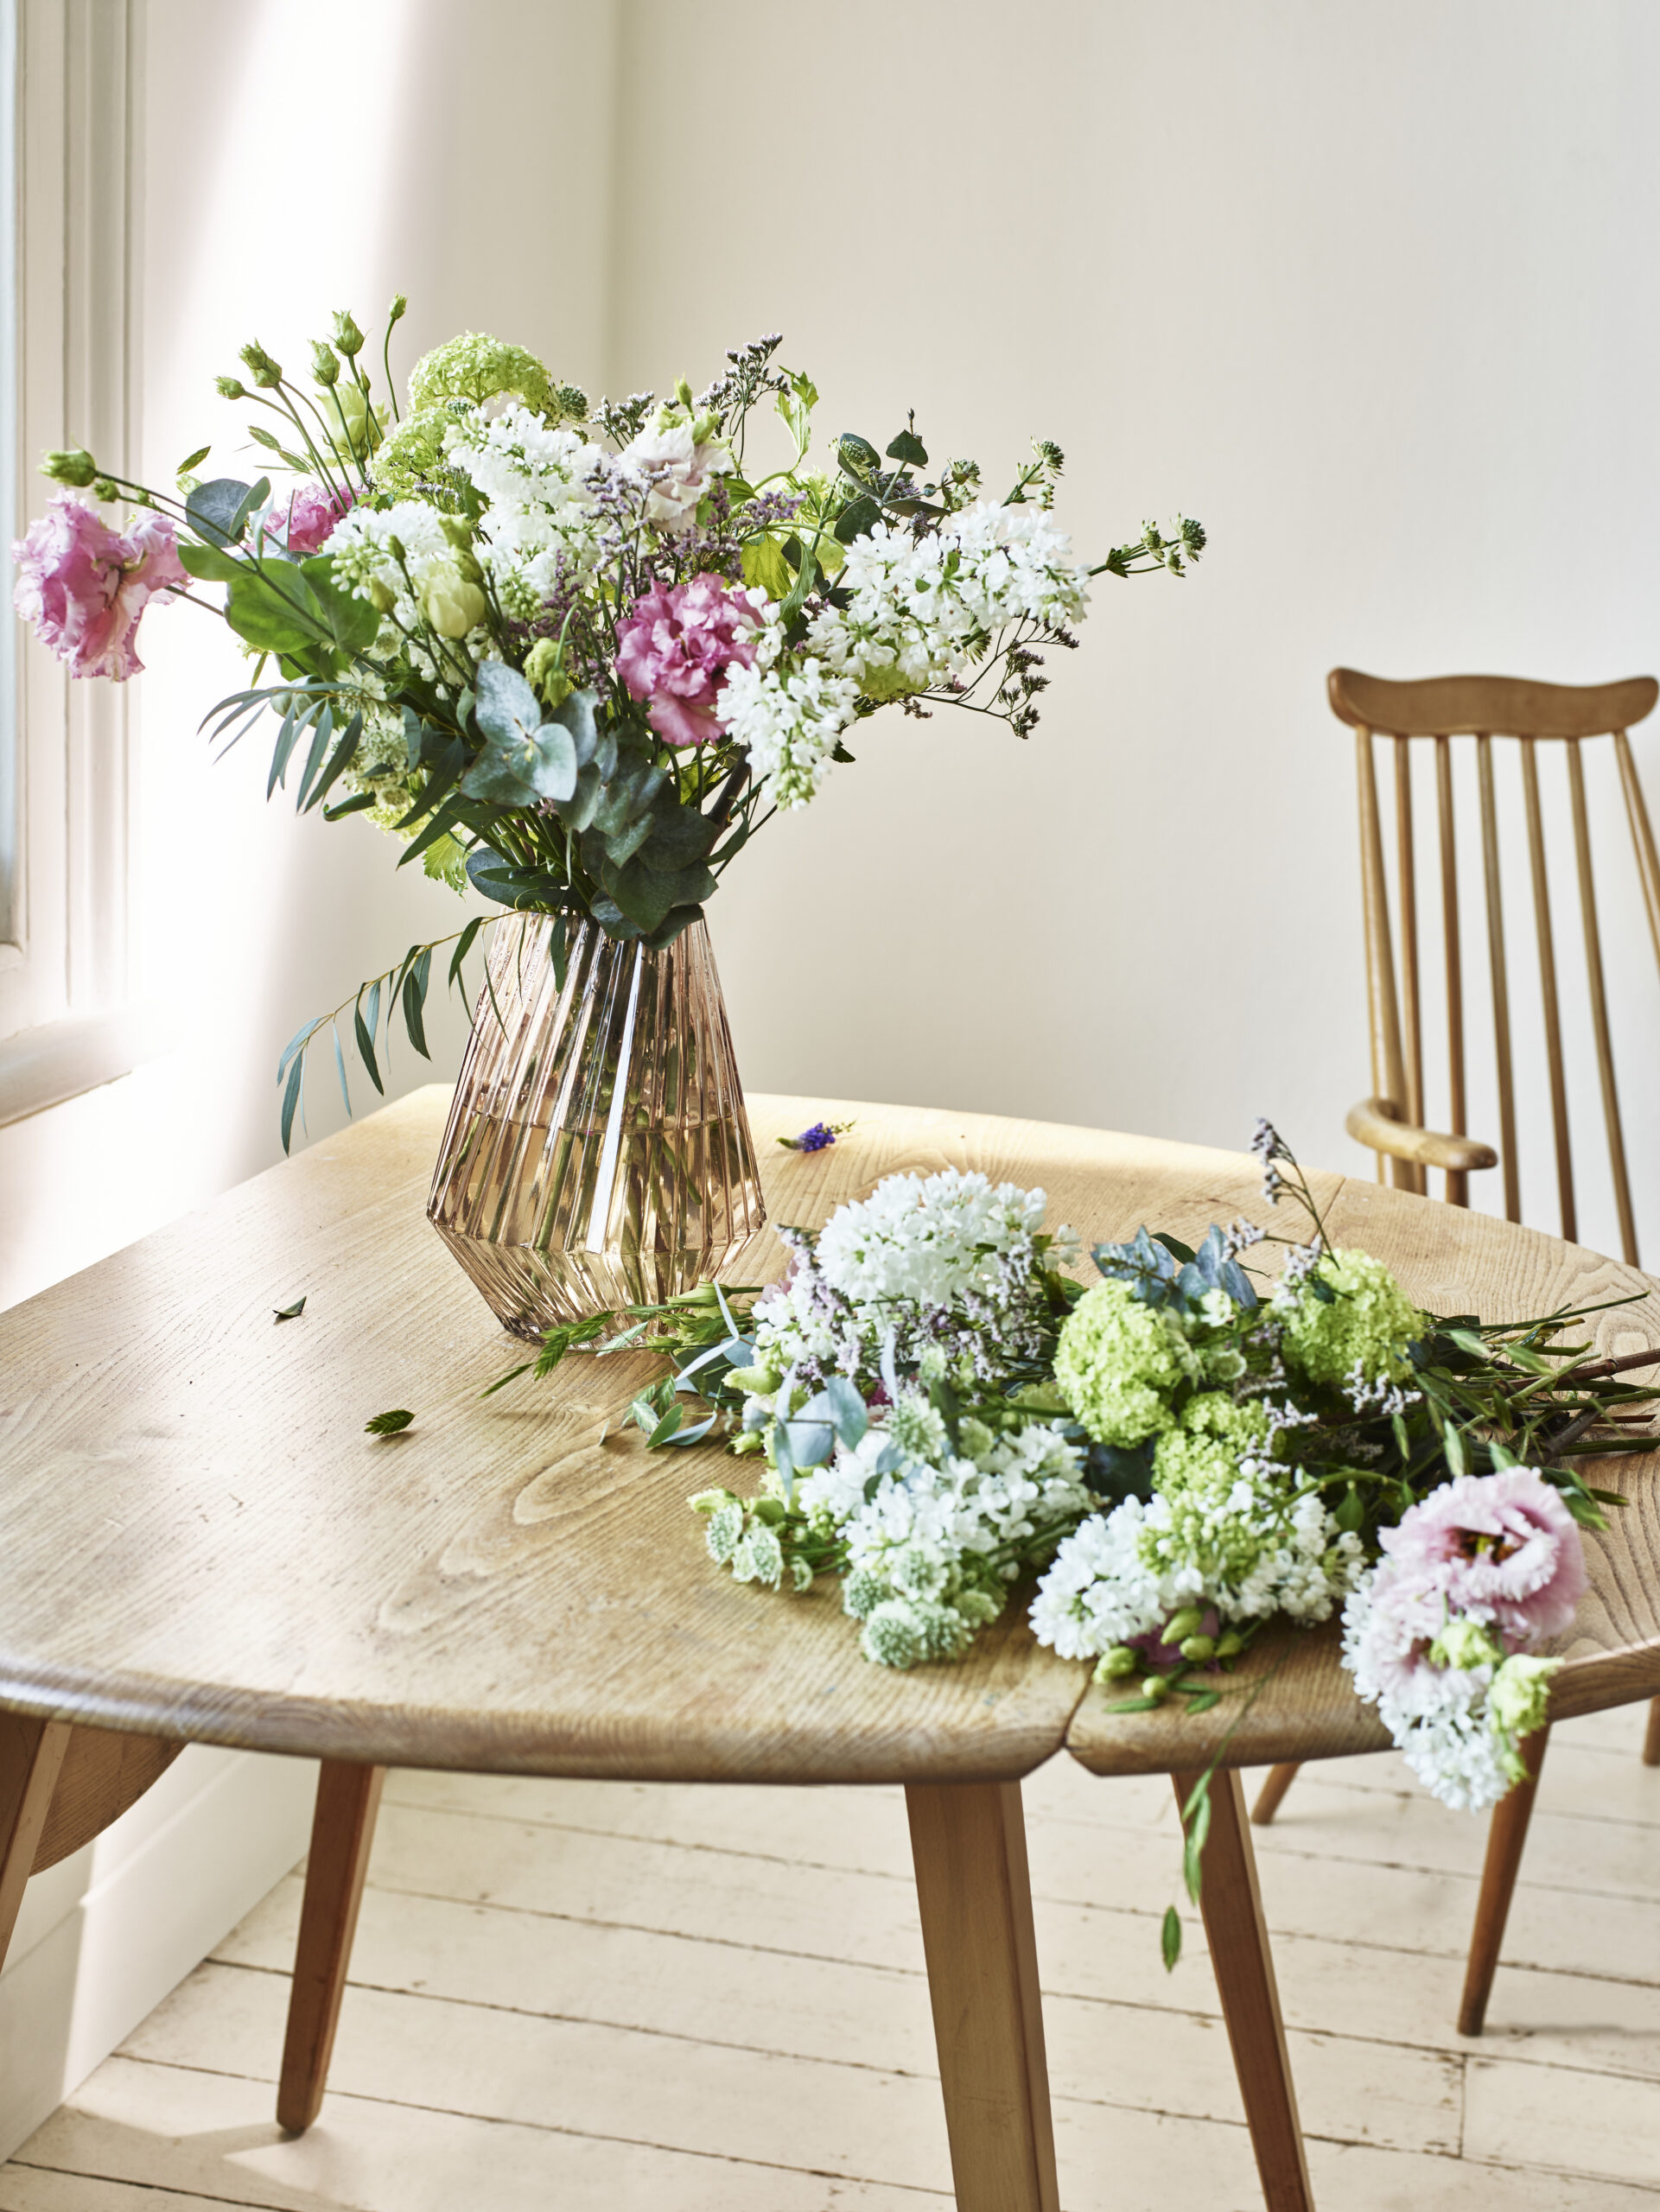 Whether for a special occasion or just because you love blooms, flowers are an easy way to add colour, scent and style into your space. Check out these 9 flower styling ideas are amongst the prettiest you'll have seen by Interior Stylist Maxine Brady. wild flowers on a table top